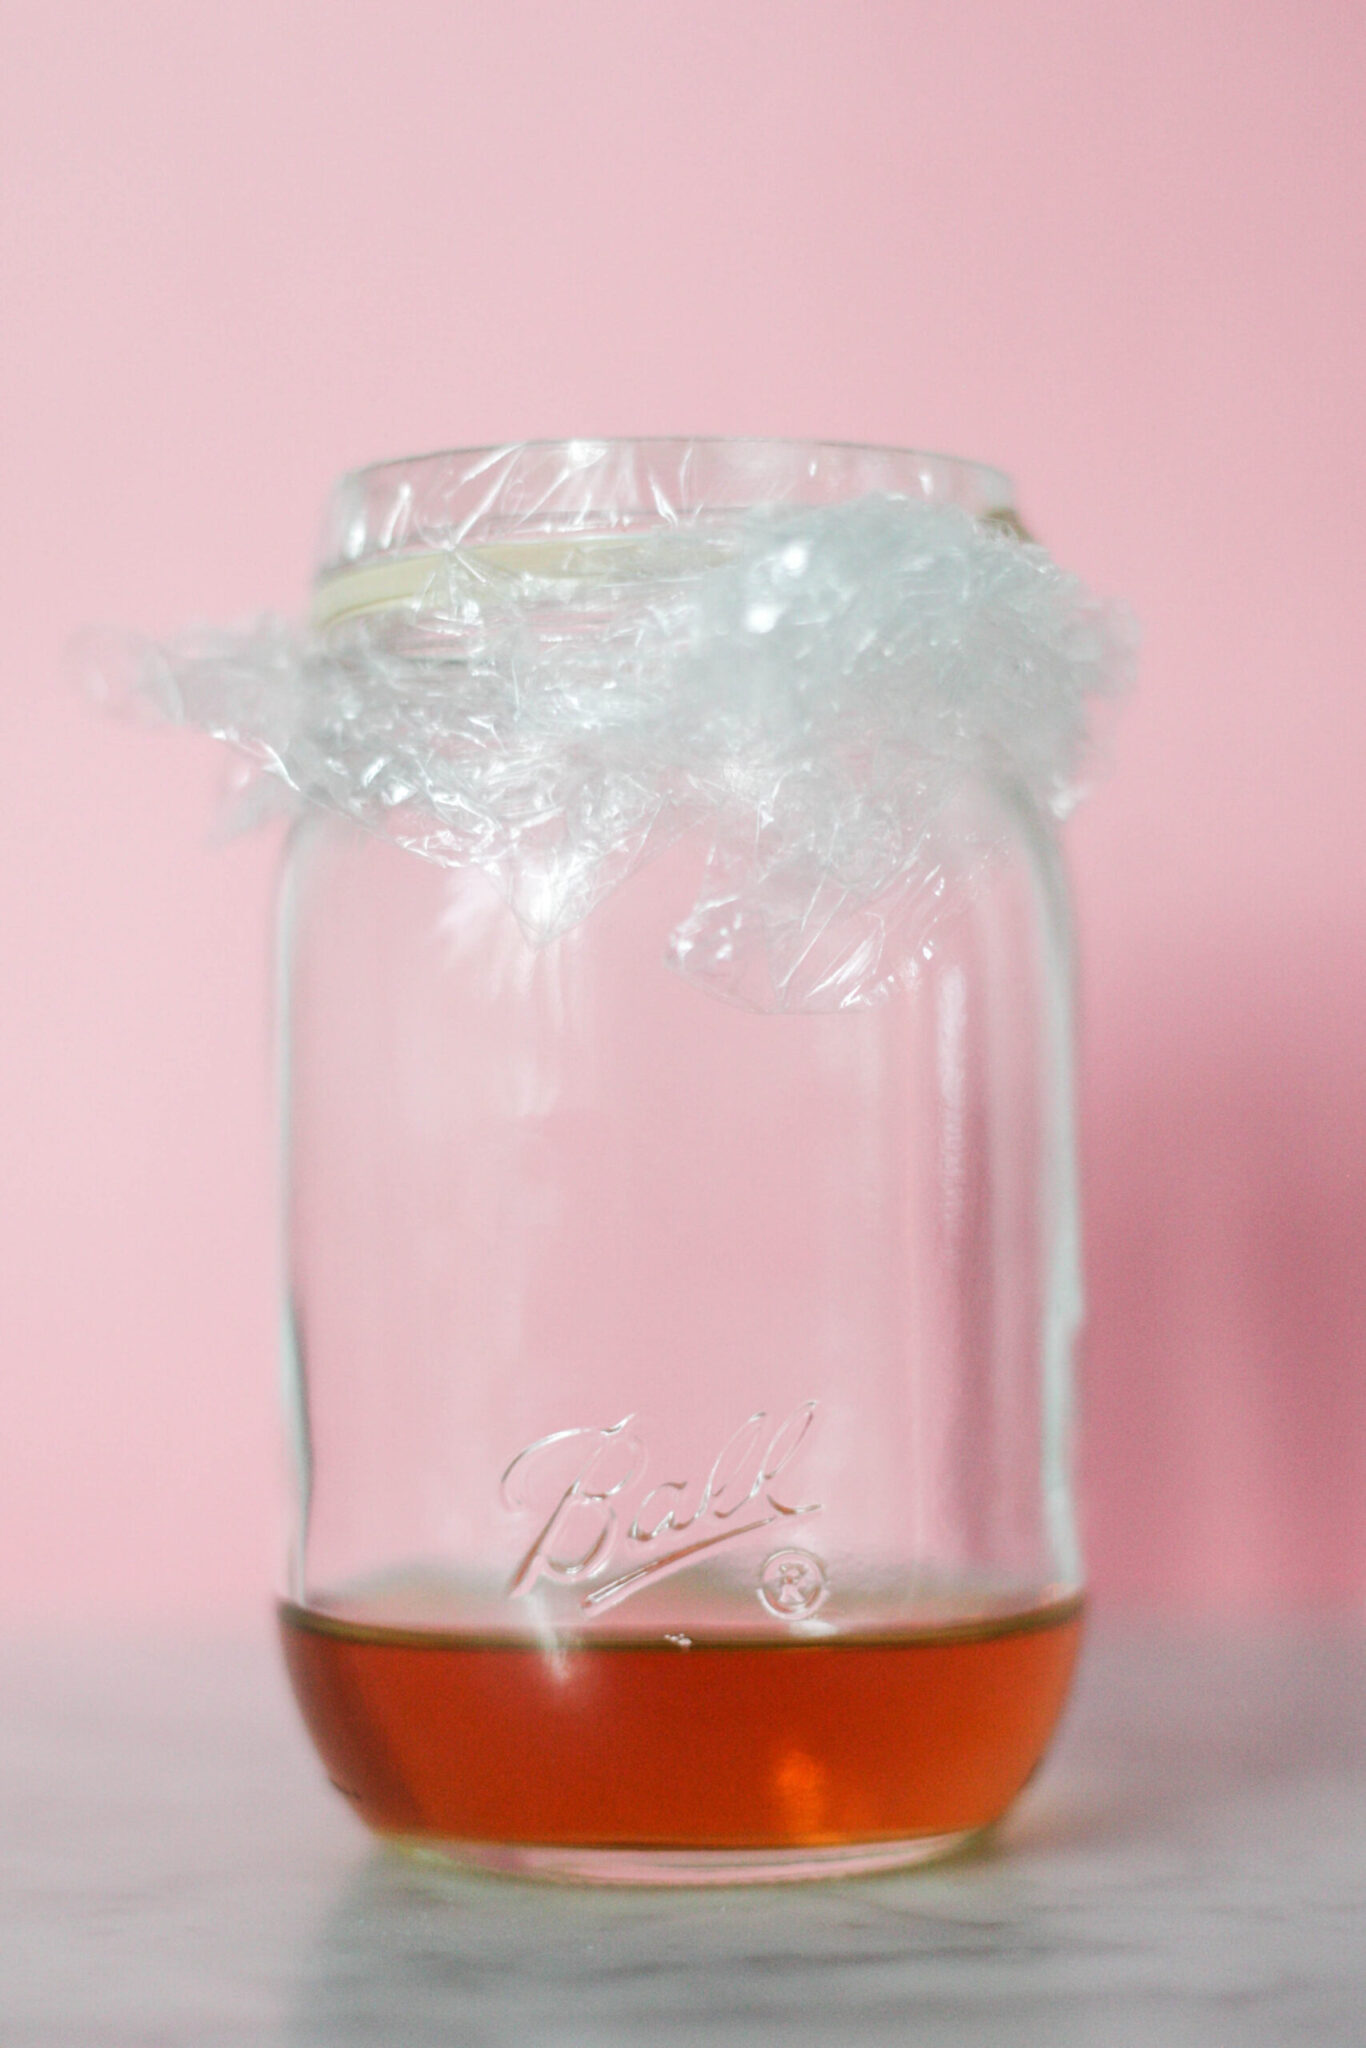 A mason jar with vinegar topped with plastic wrap to get rid of fruit flies.